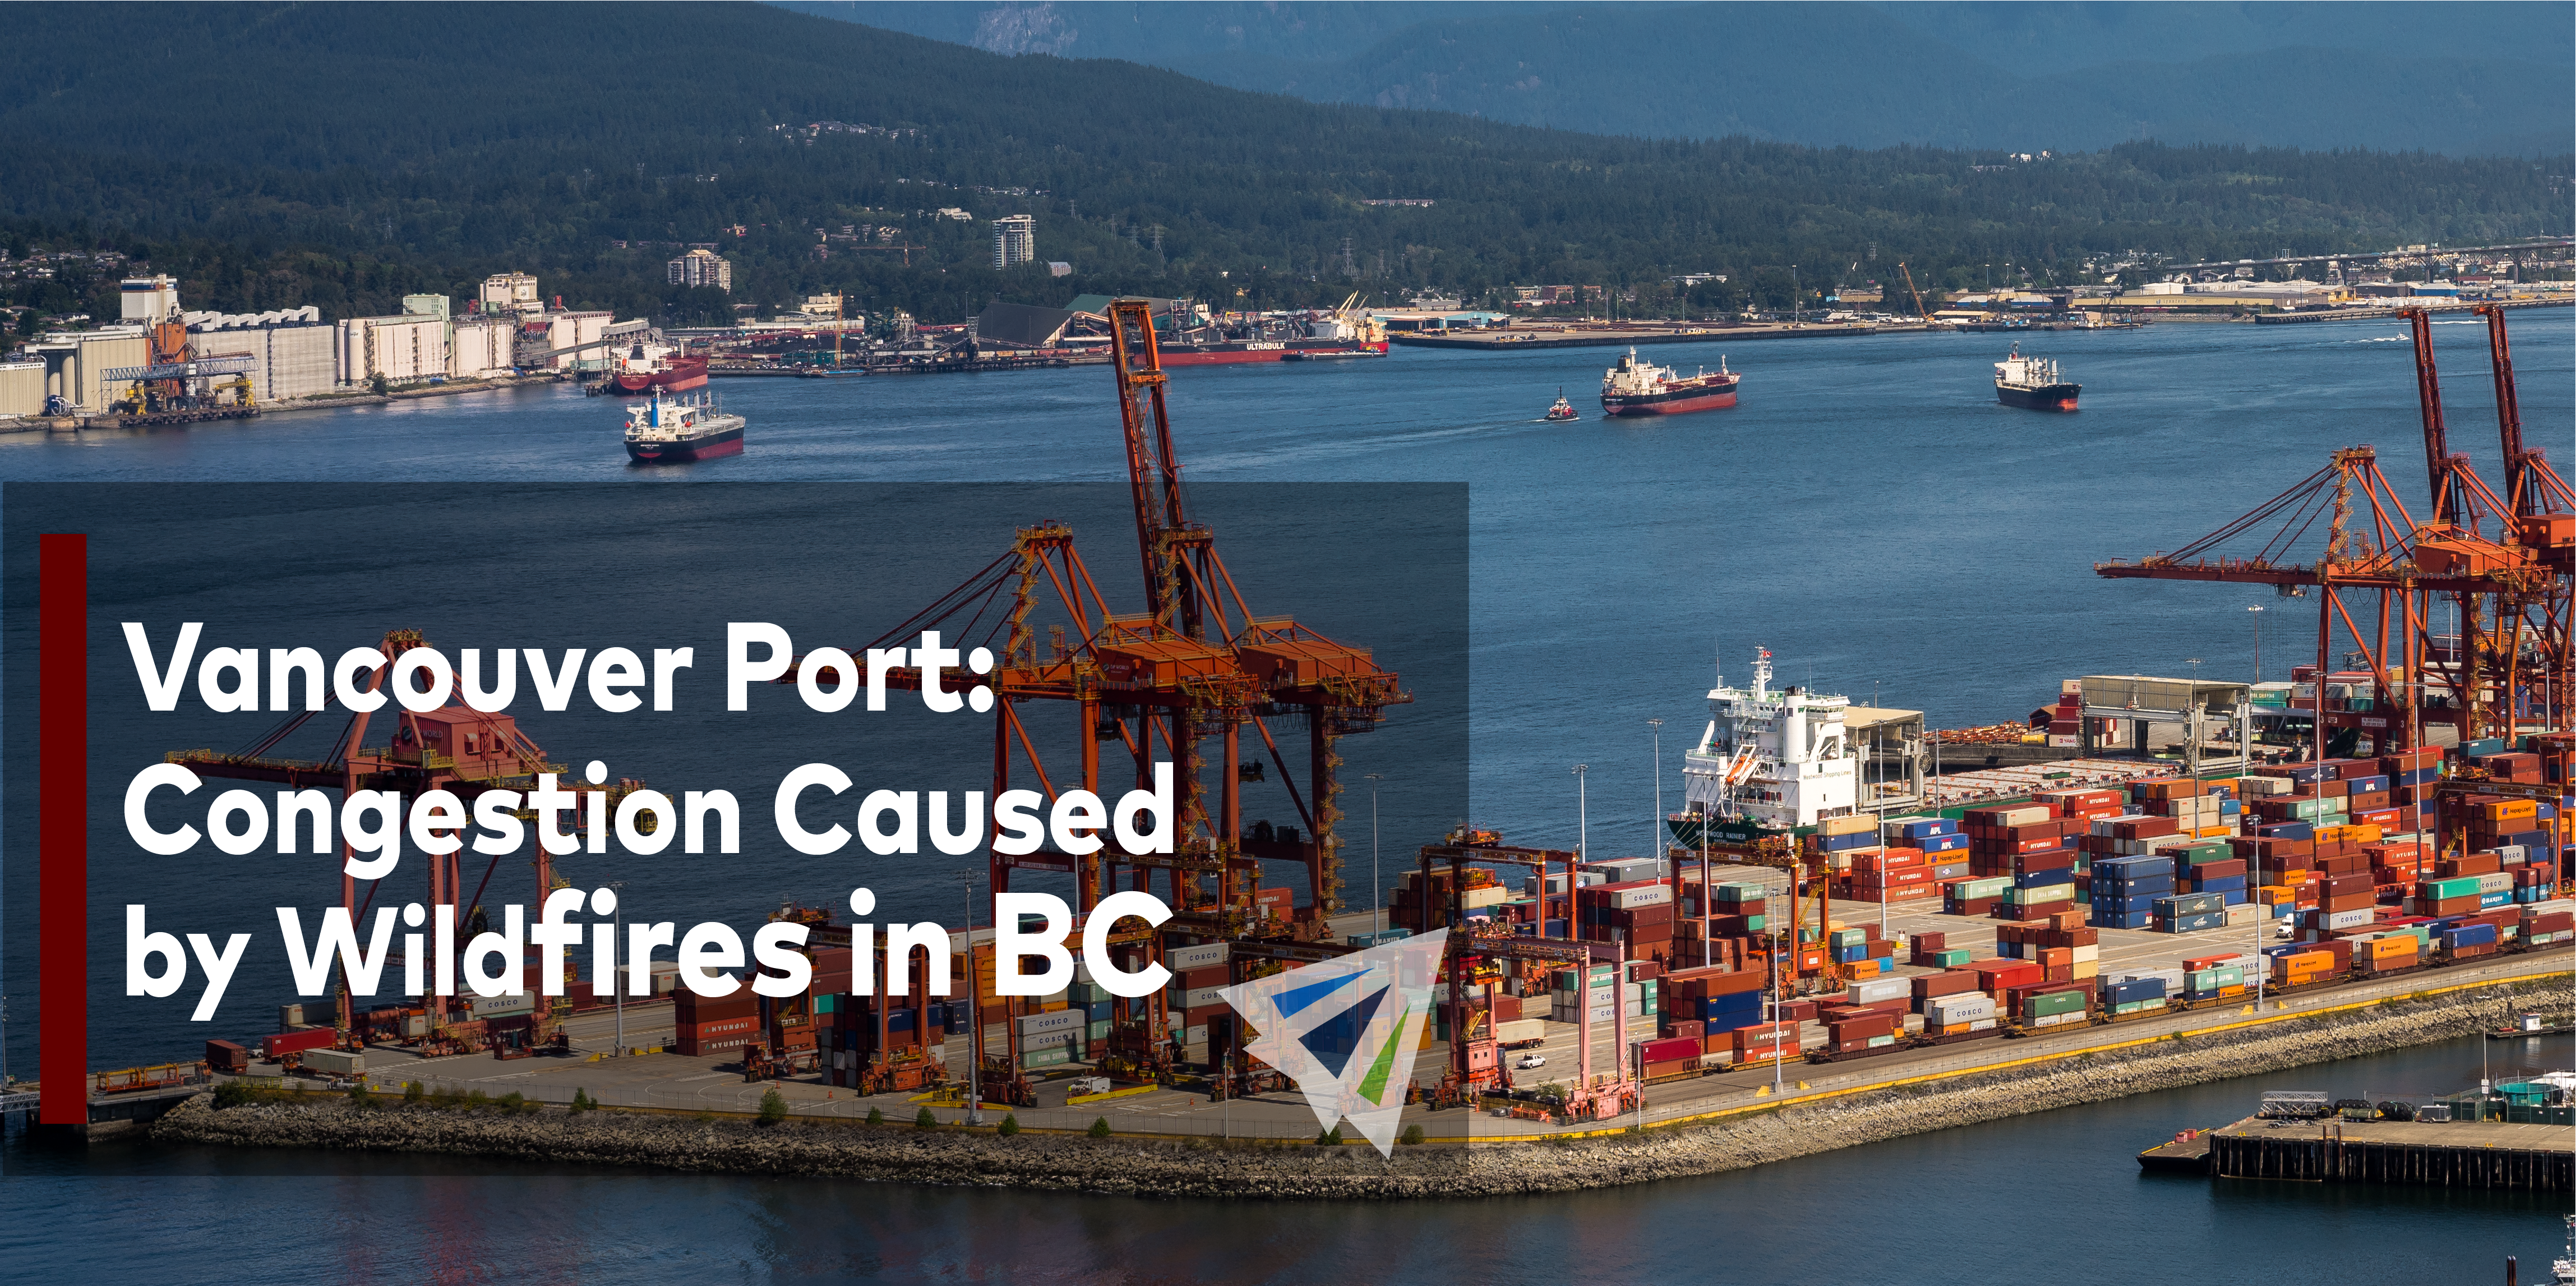 Vancouver Port: Congestion Caused by Wildfires in BC